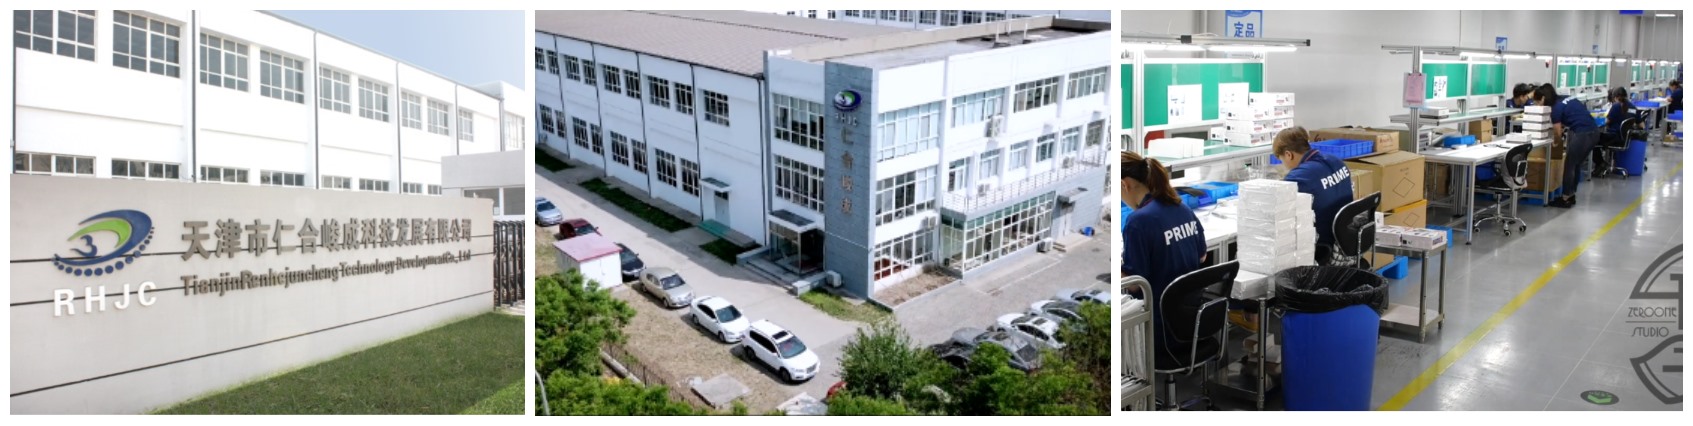 brushless dental micromotor factory photoes